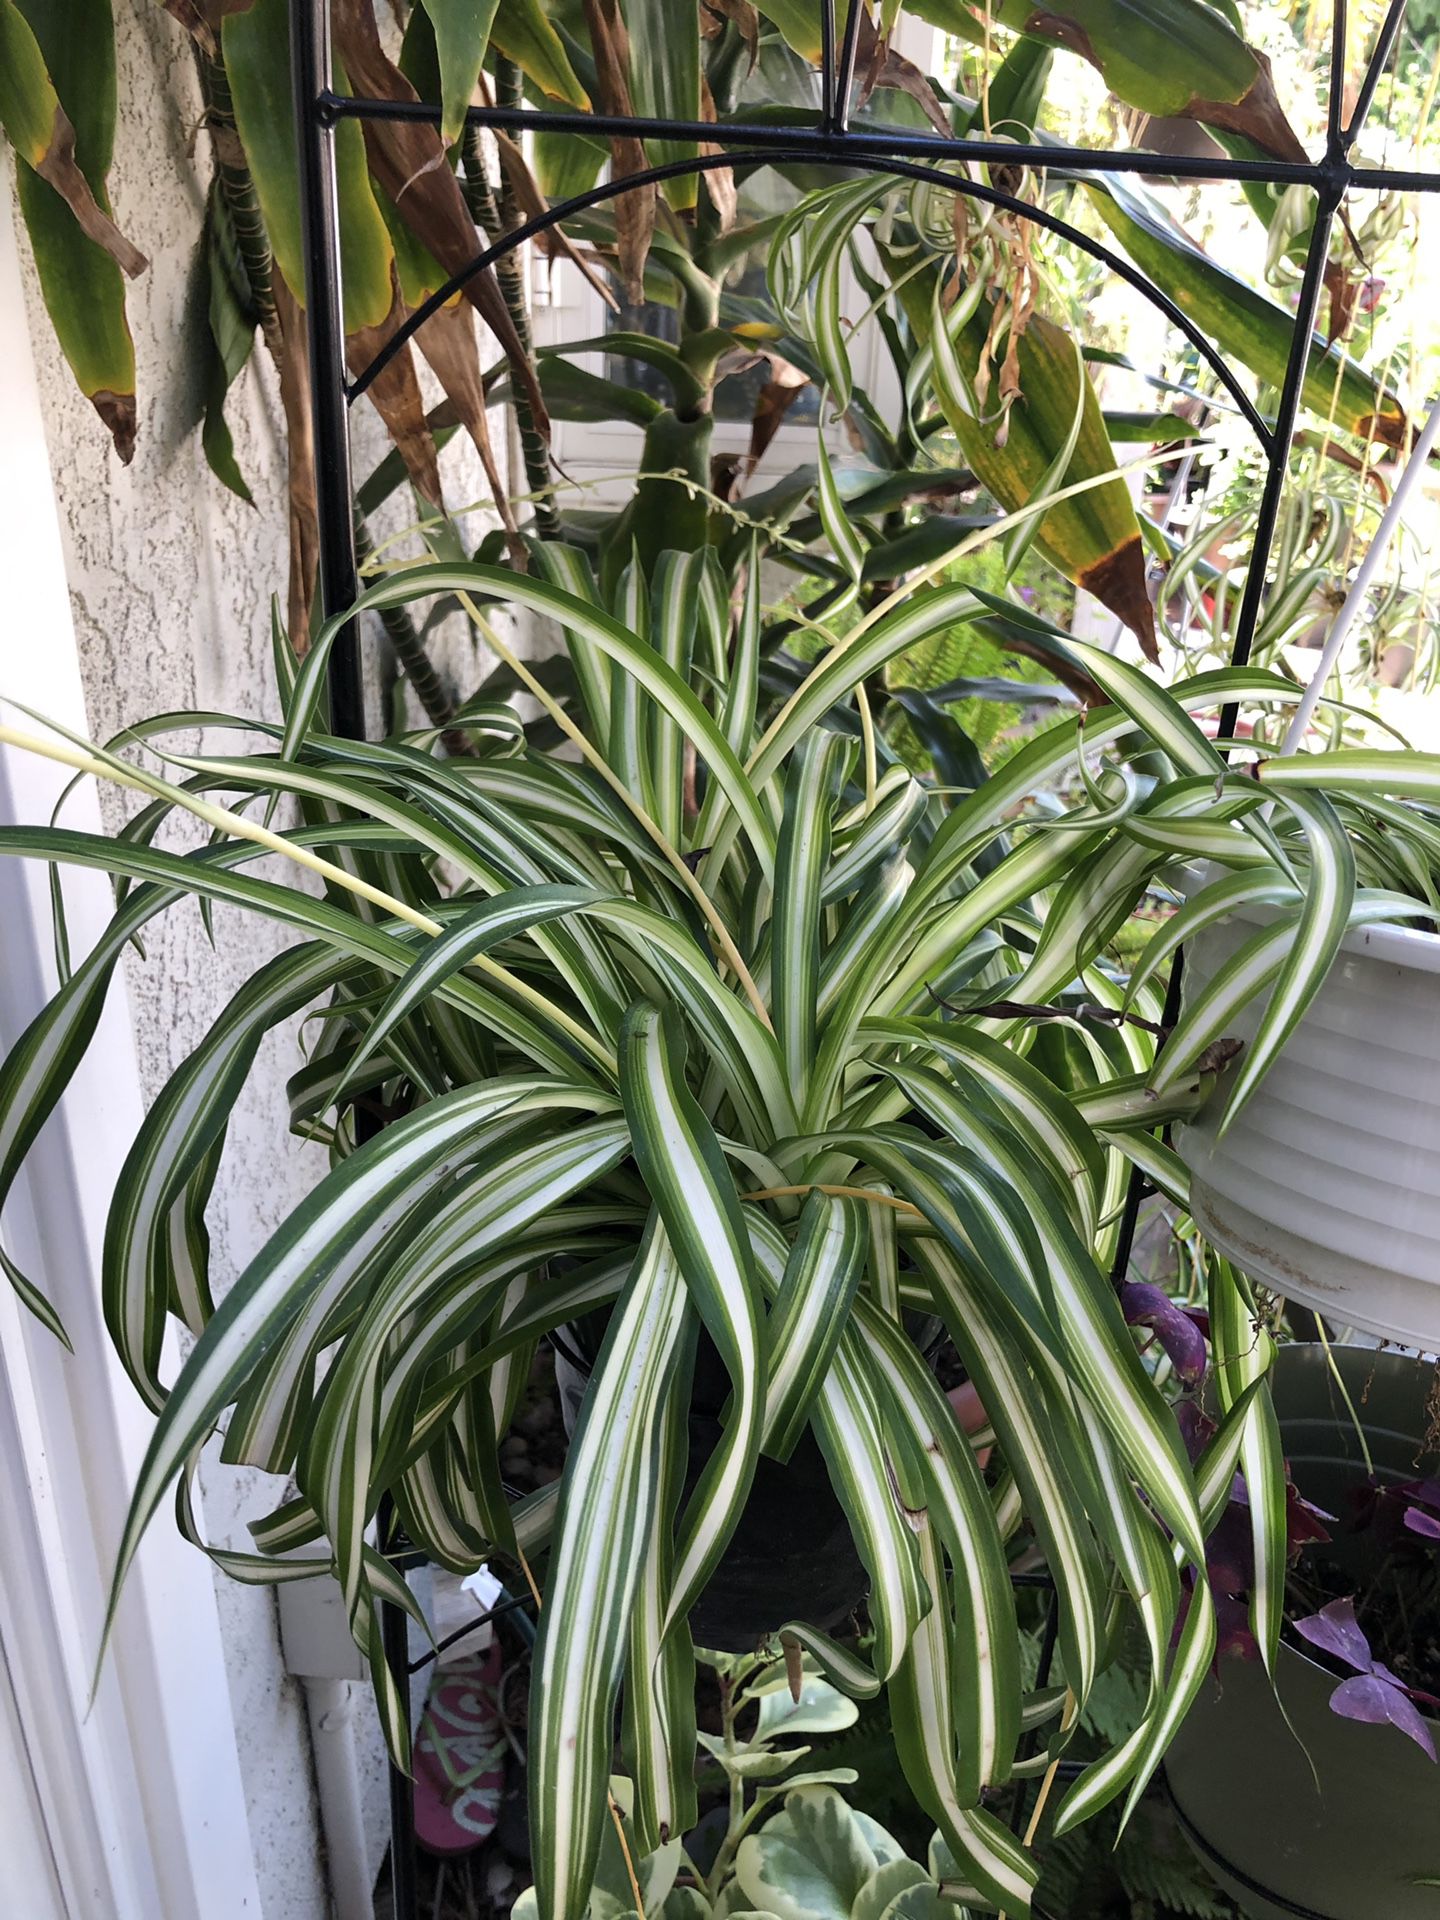 Spider plant with plenty of plant shoots